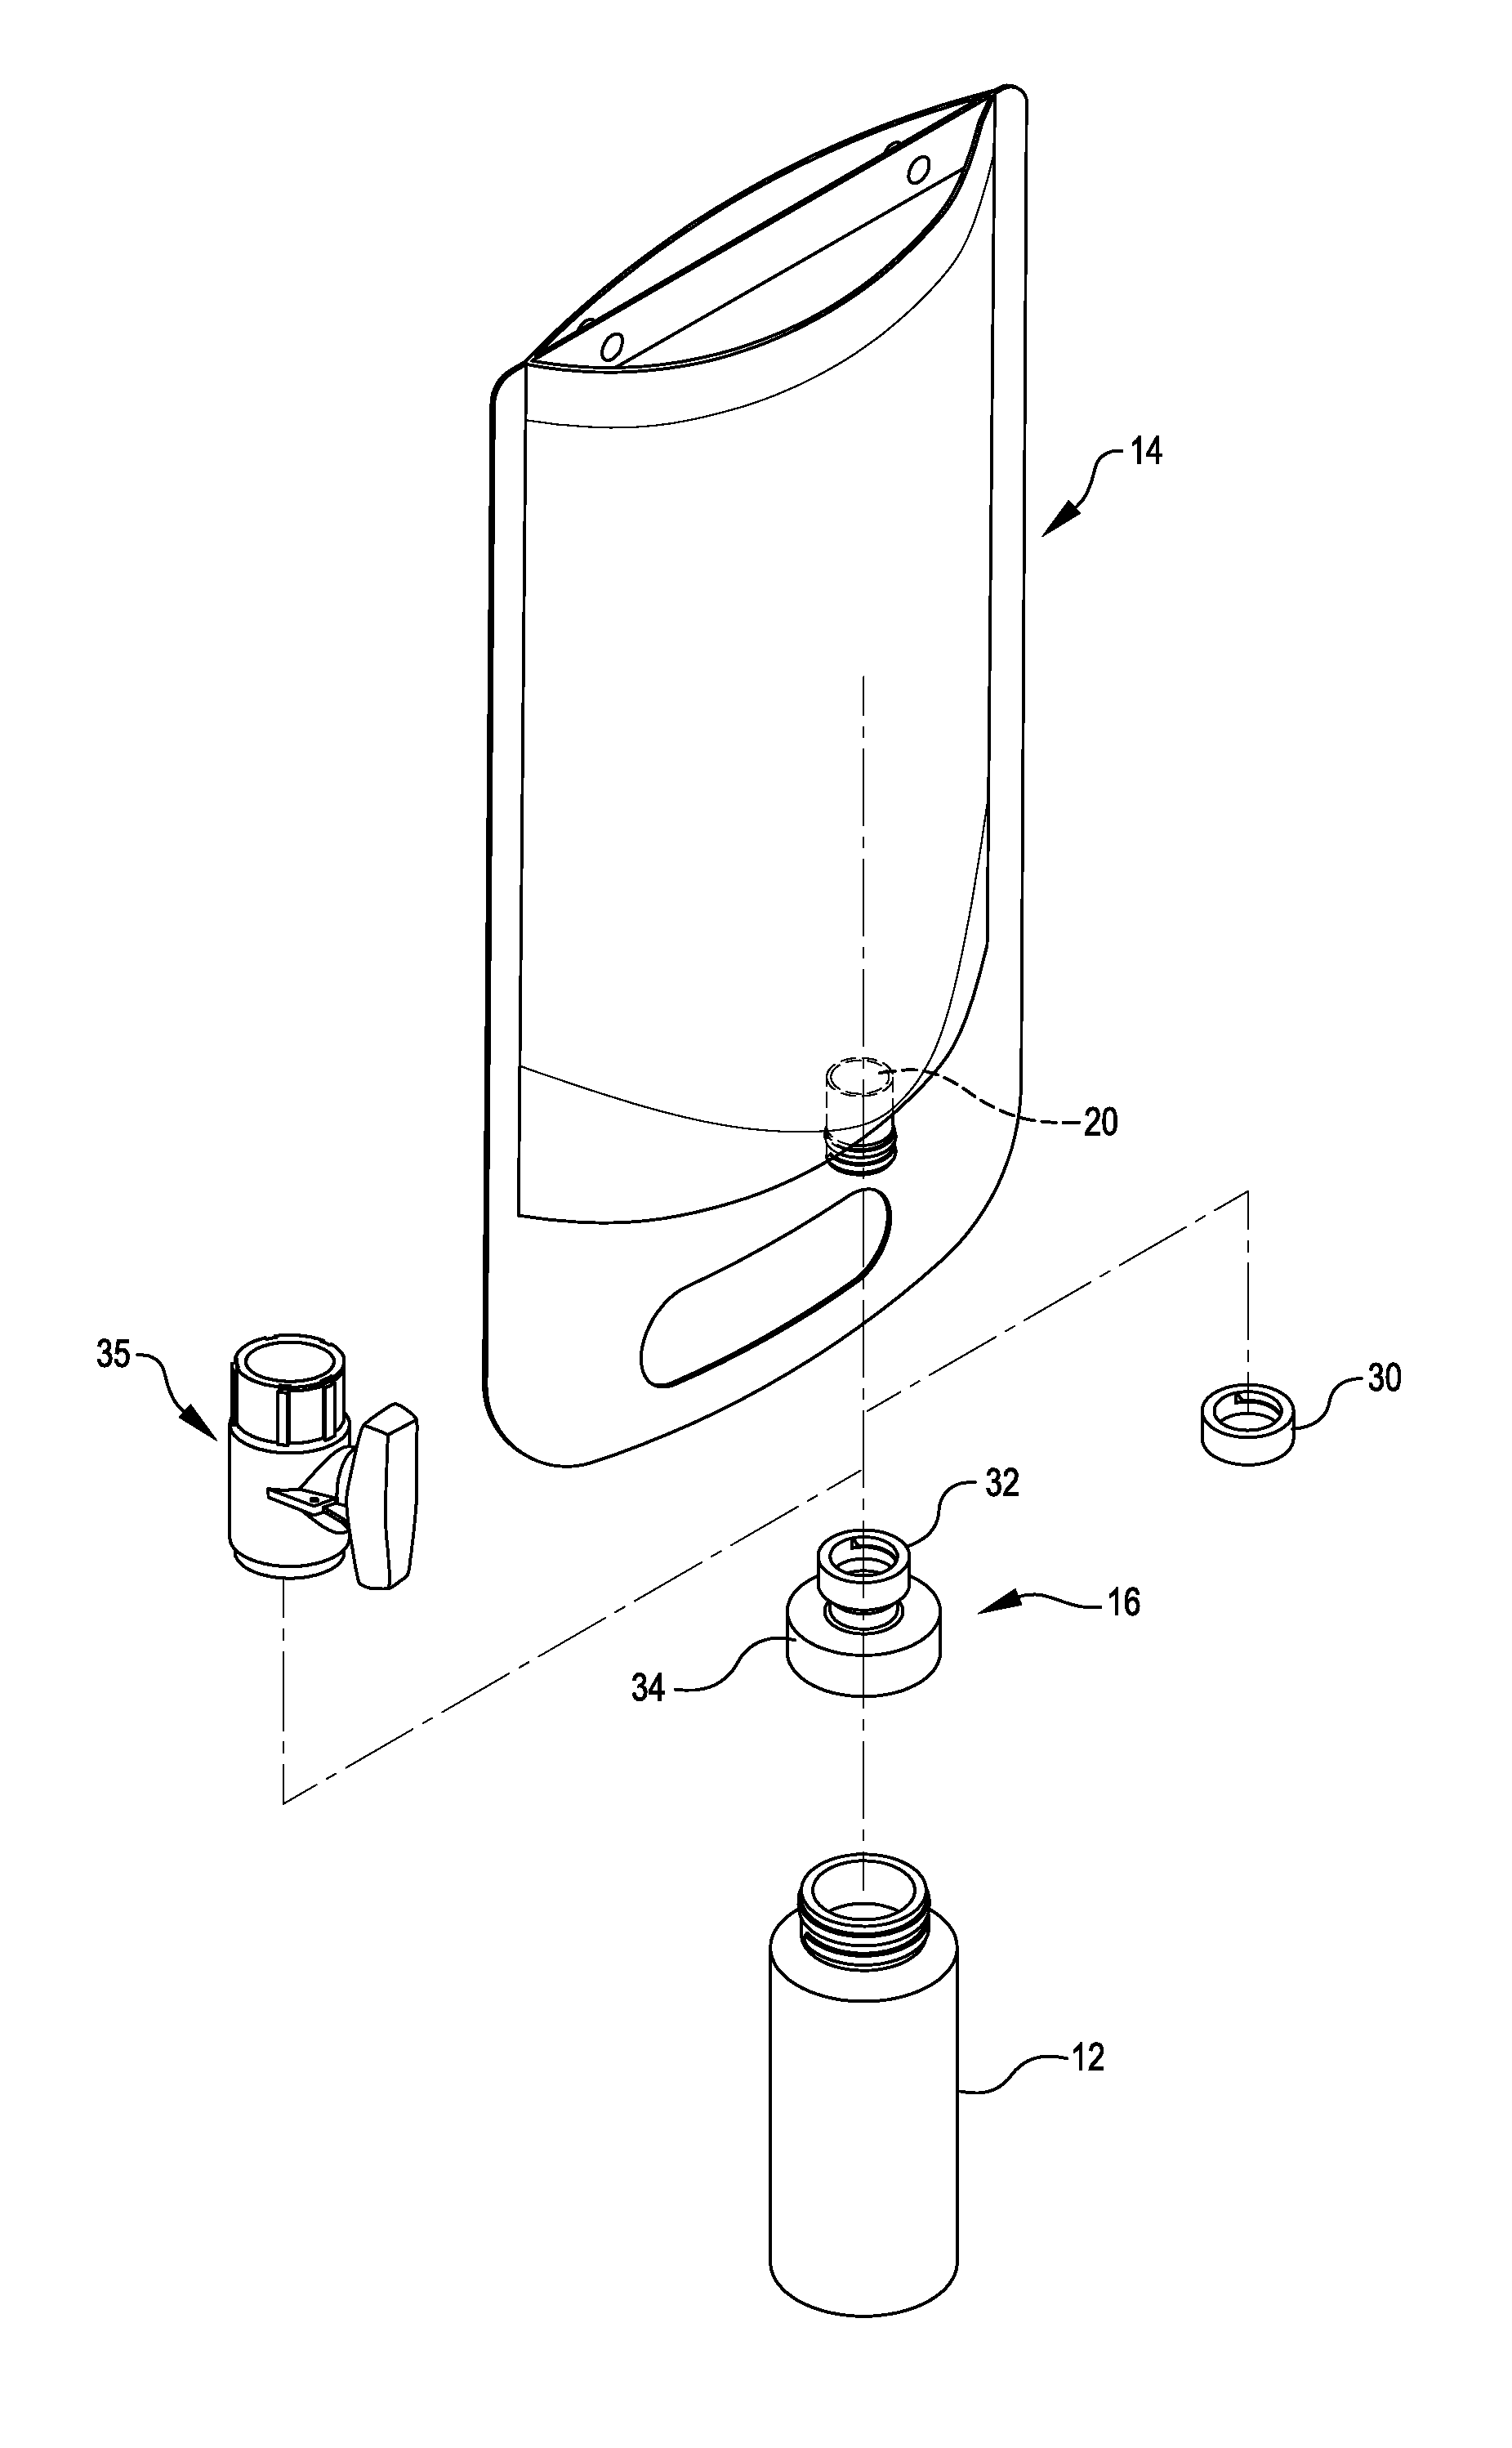 Adaptor for connecting a fluid package to a dispenser bottle